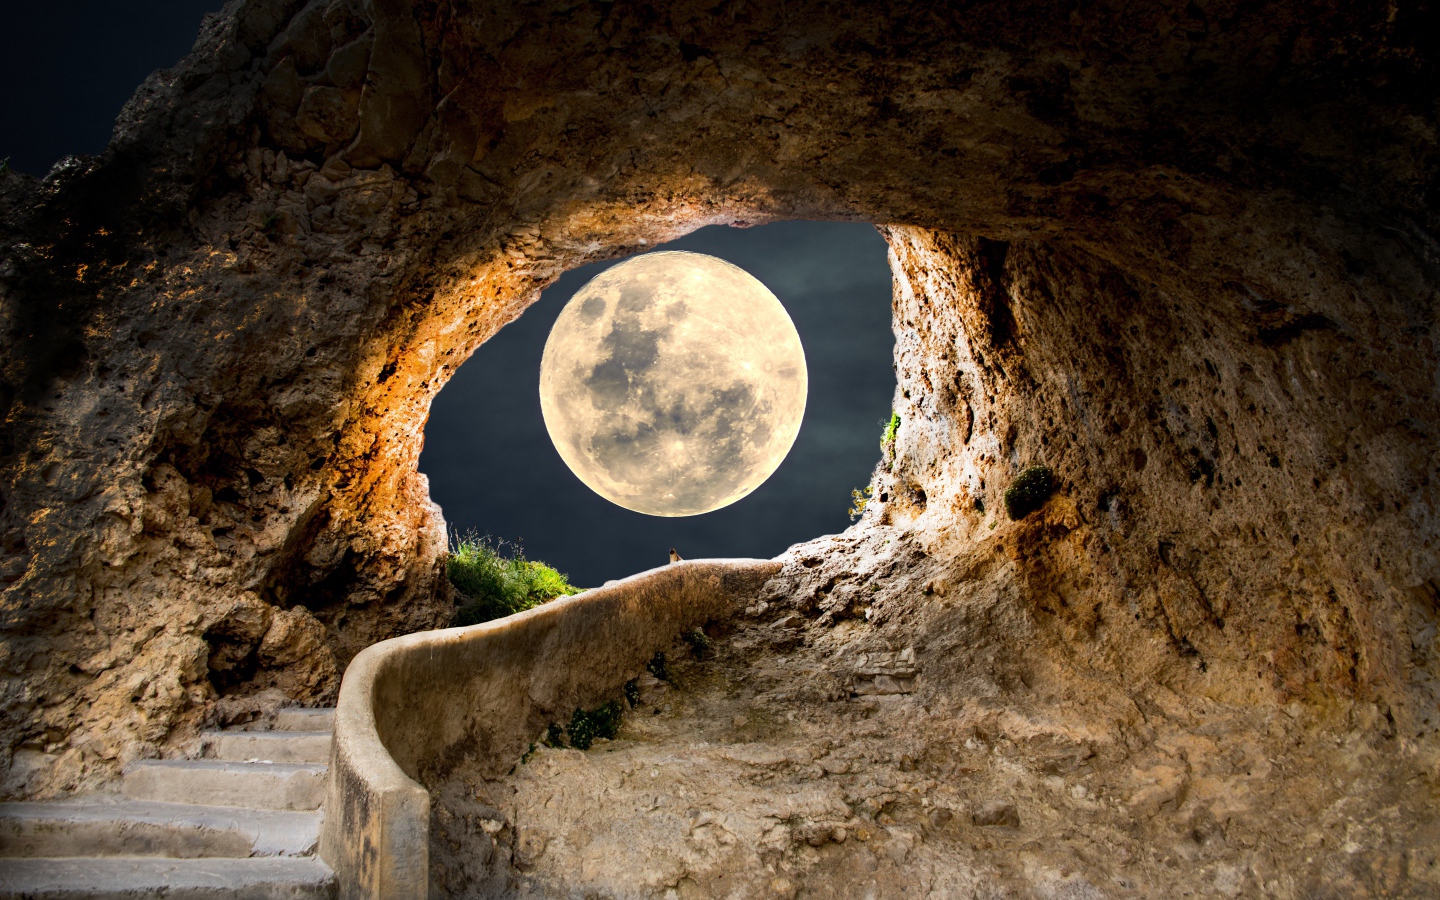 A large white moon illuminates the passage to the cave